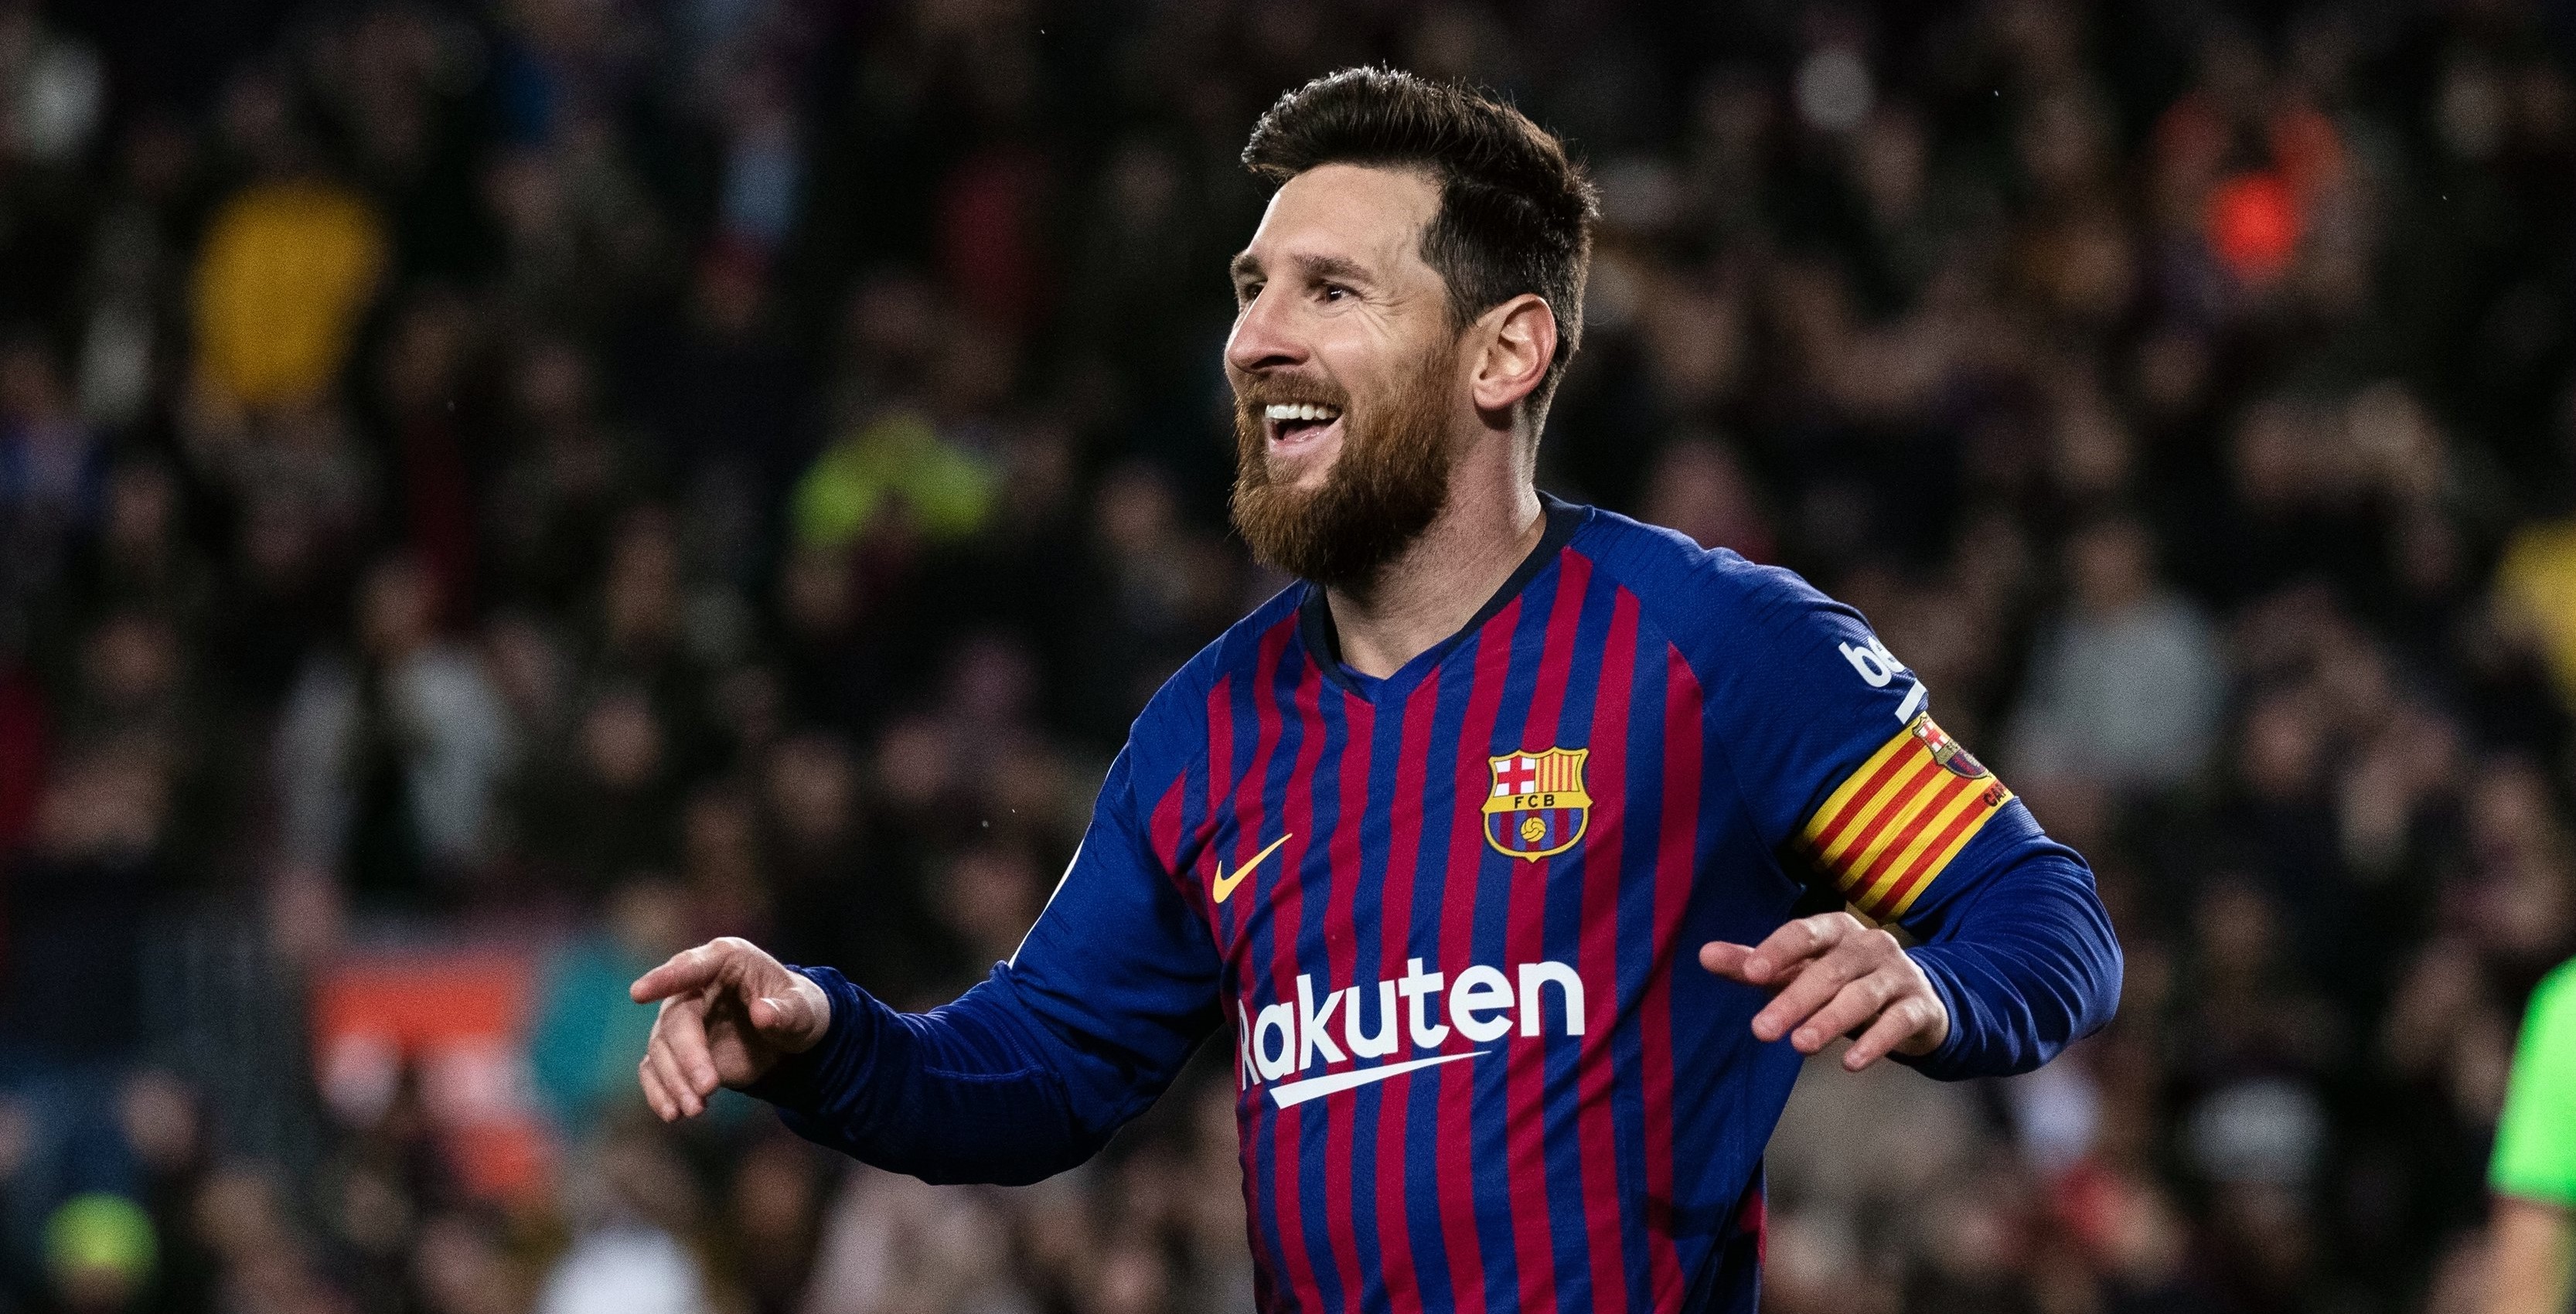 Barca beat Betis to keep pace with Real Madrid